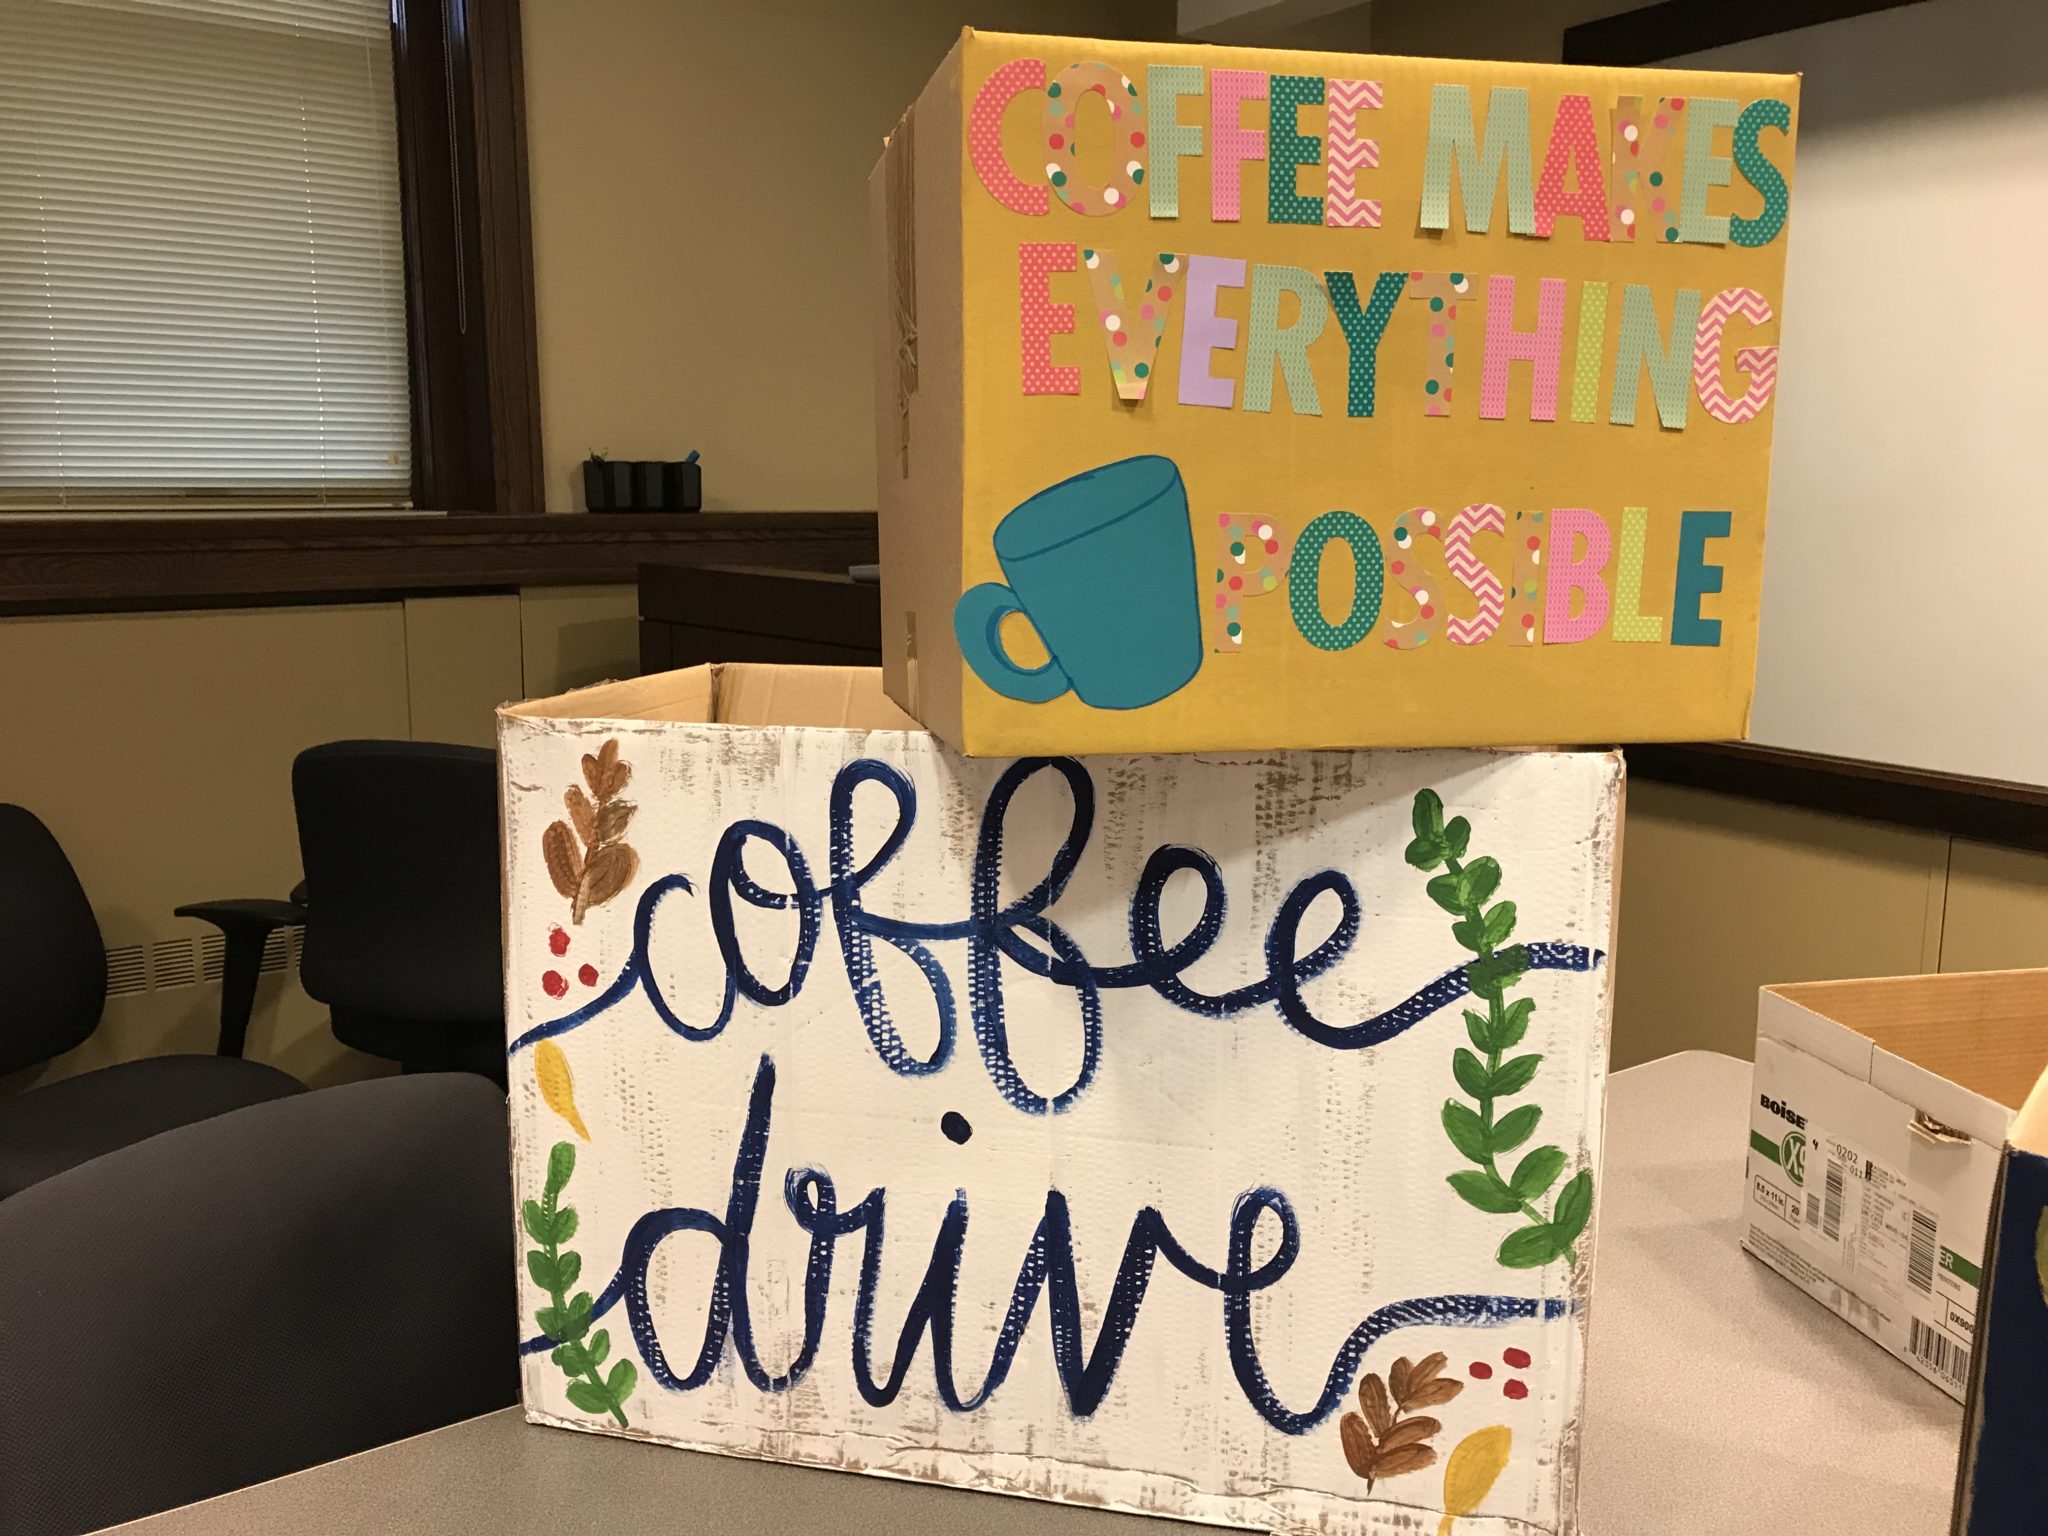 Two decorated cardboard boxes for the collection of donated coffee are stacked on a table